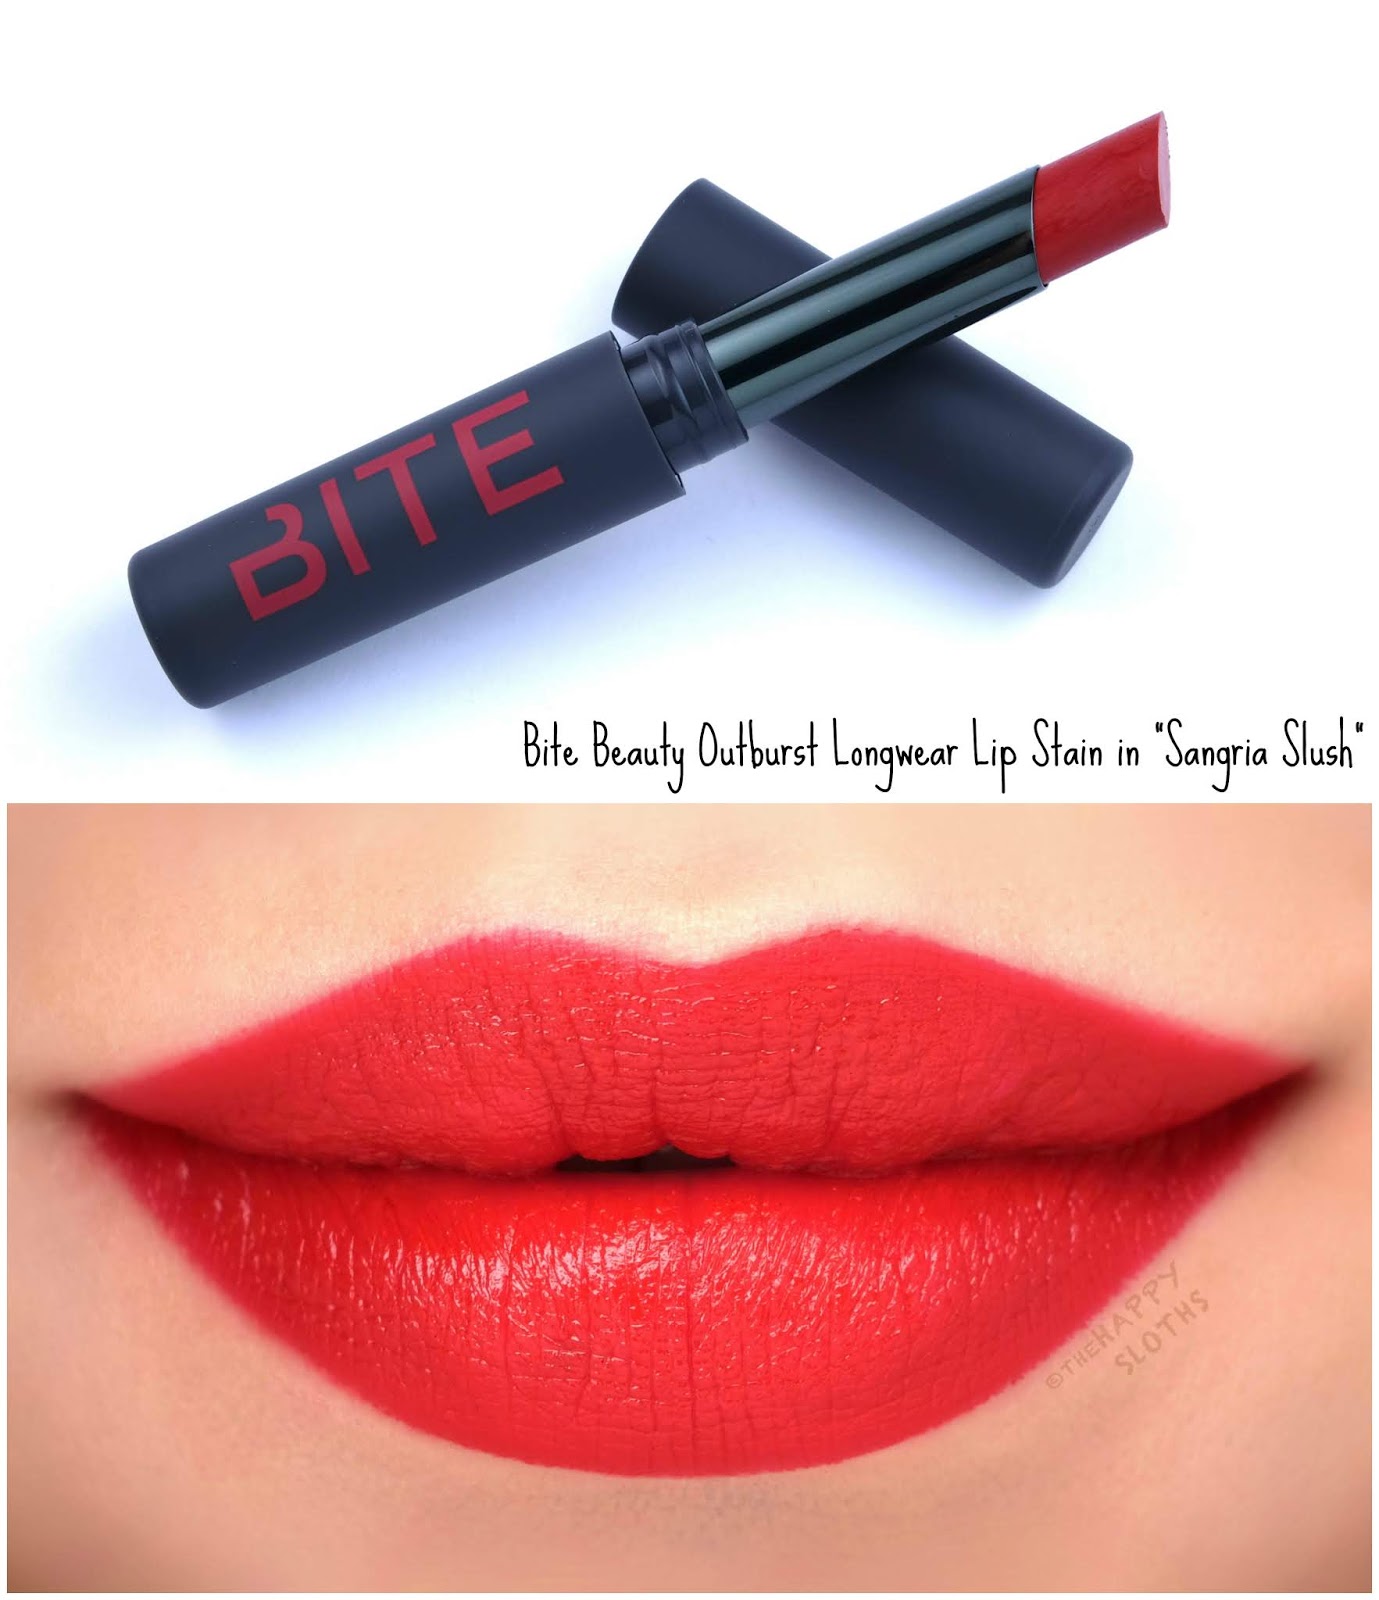 Bite Beauty | Outburst Longwear Lip Stain in "Sangria Slush": Review and Swatches